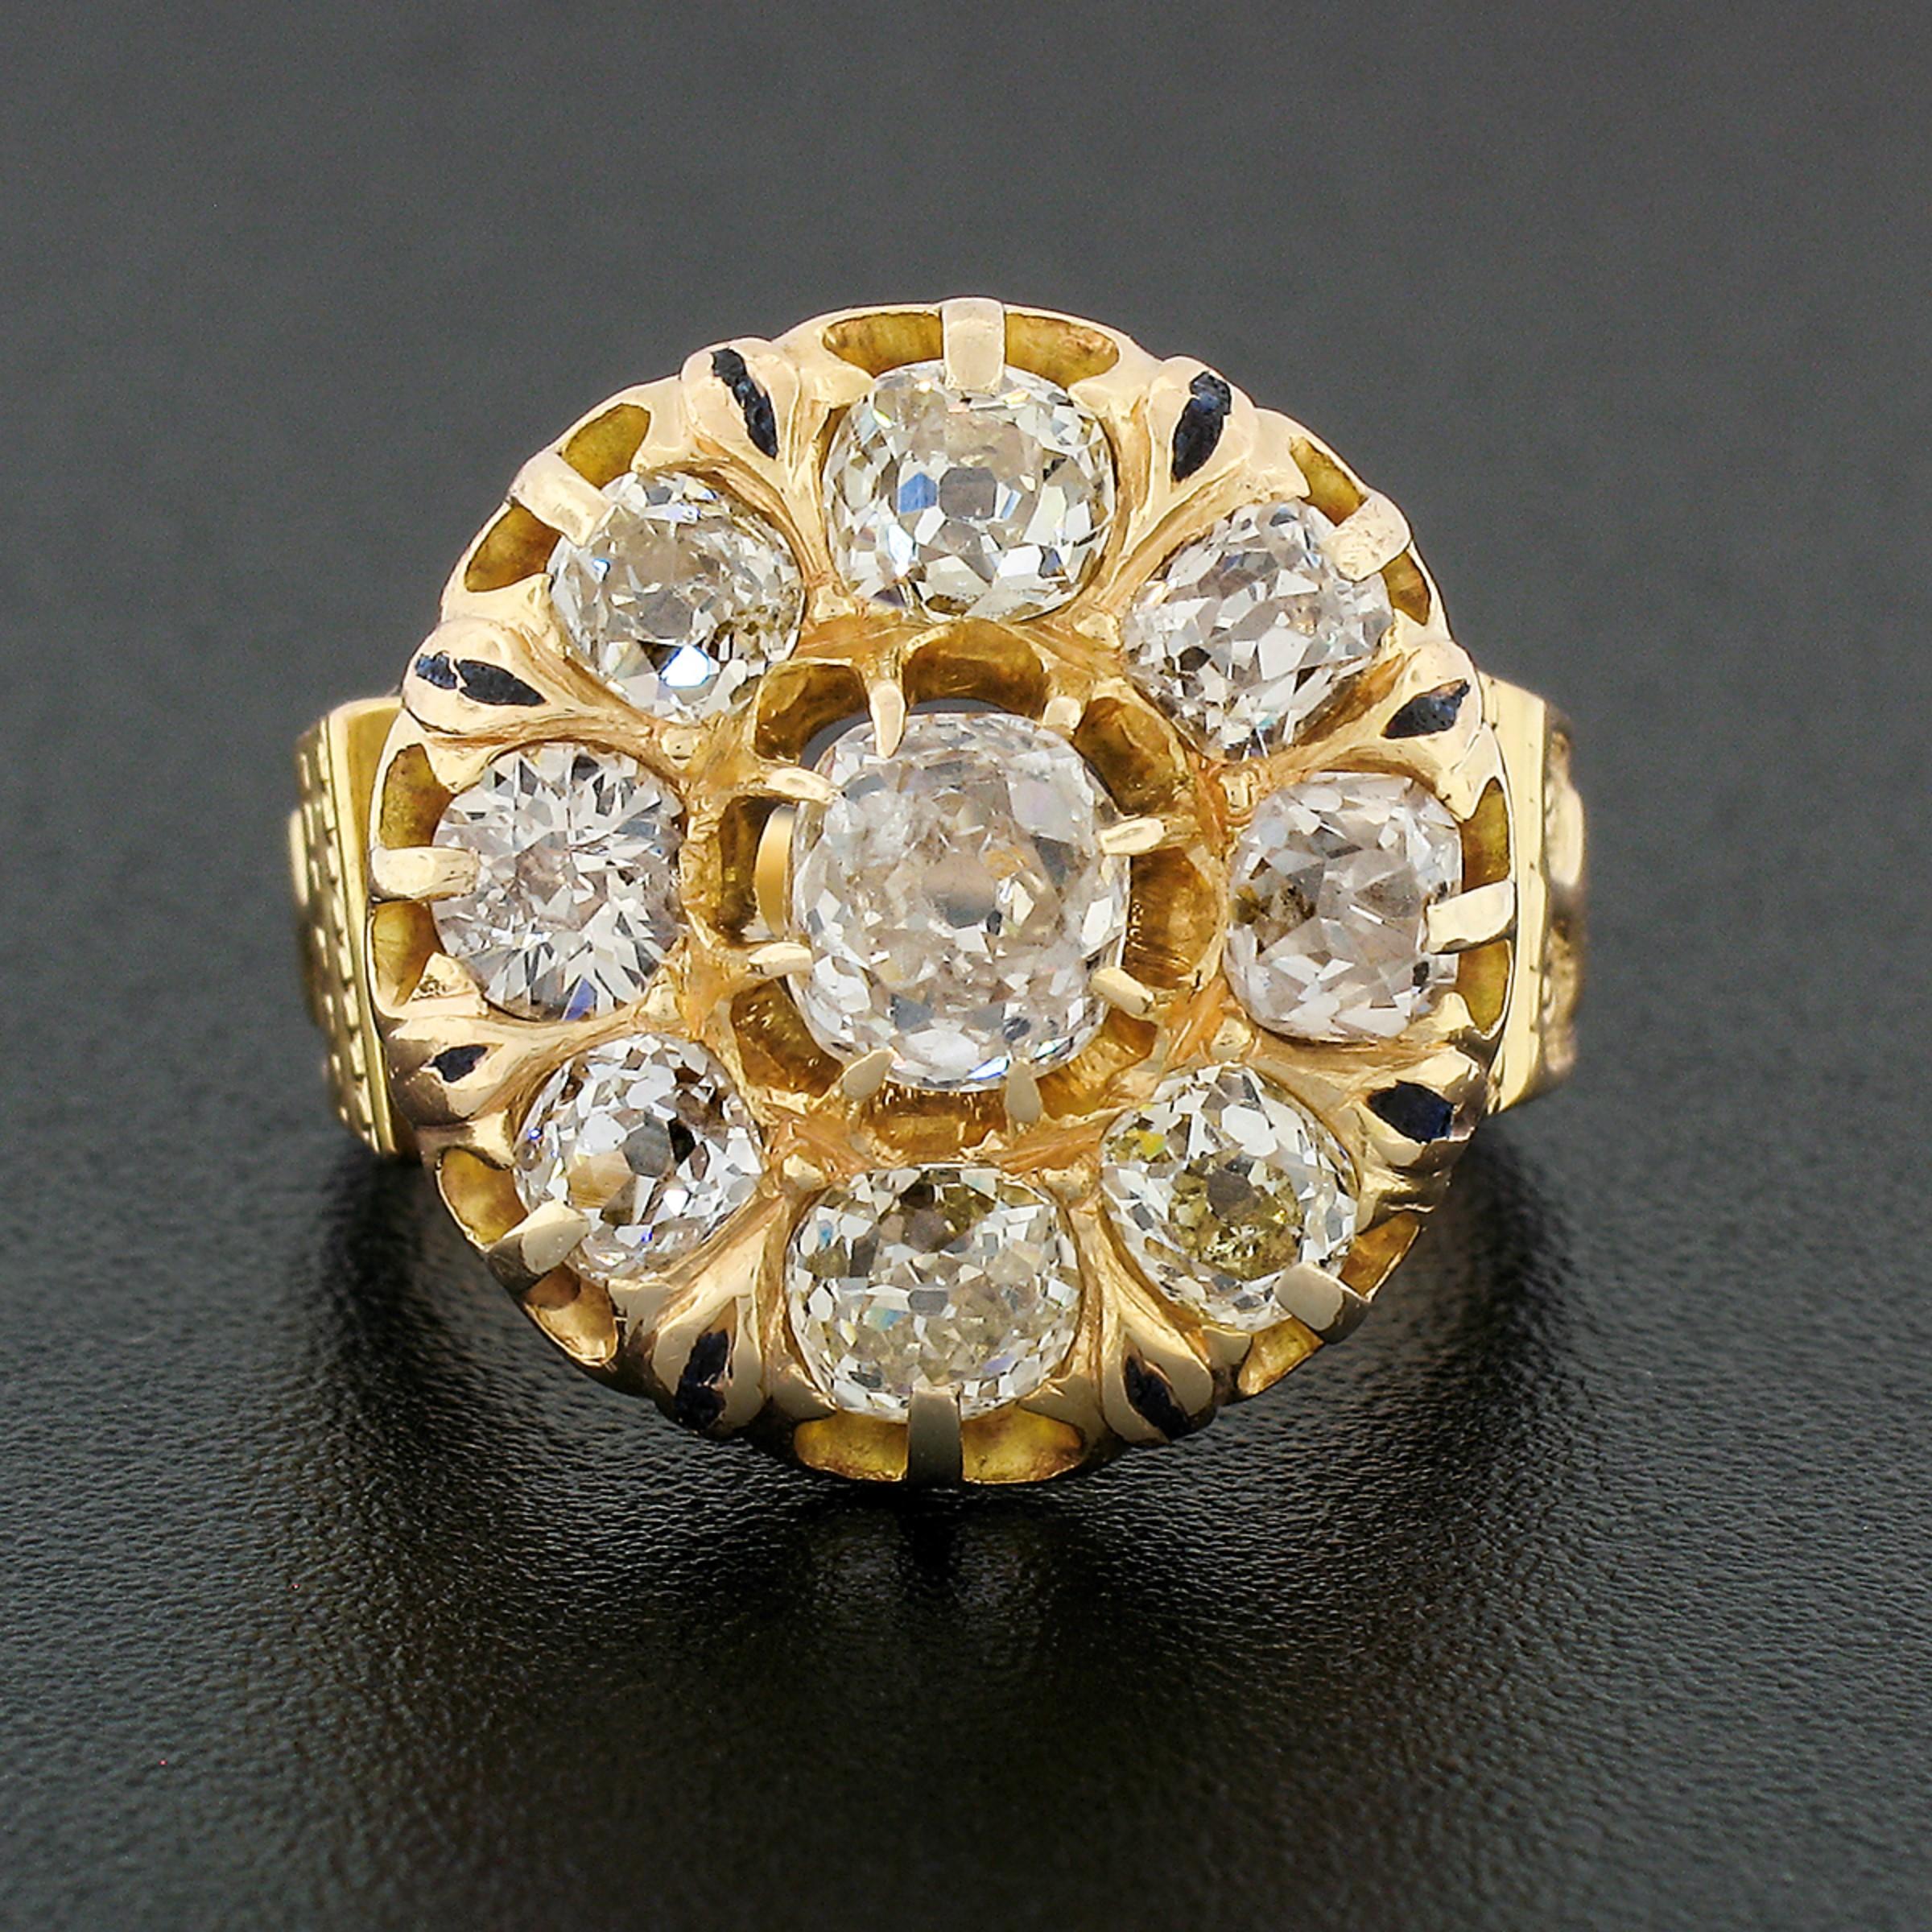 Here we have a magnificent antique diamond platter ring crafted from solid 18k yellow gold during the Victorian era. The ring features an approximately 0.65 carat old mine cut diamond 8-prong set at its center. It is a fine quality stone with